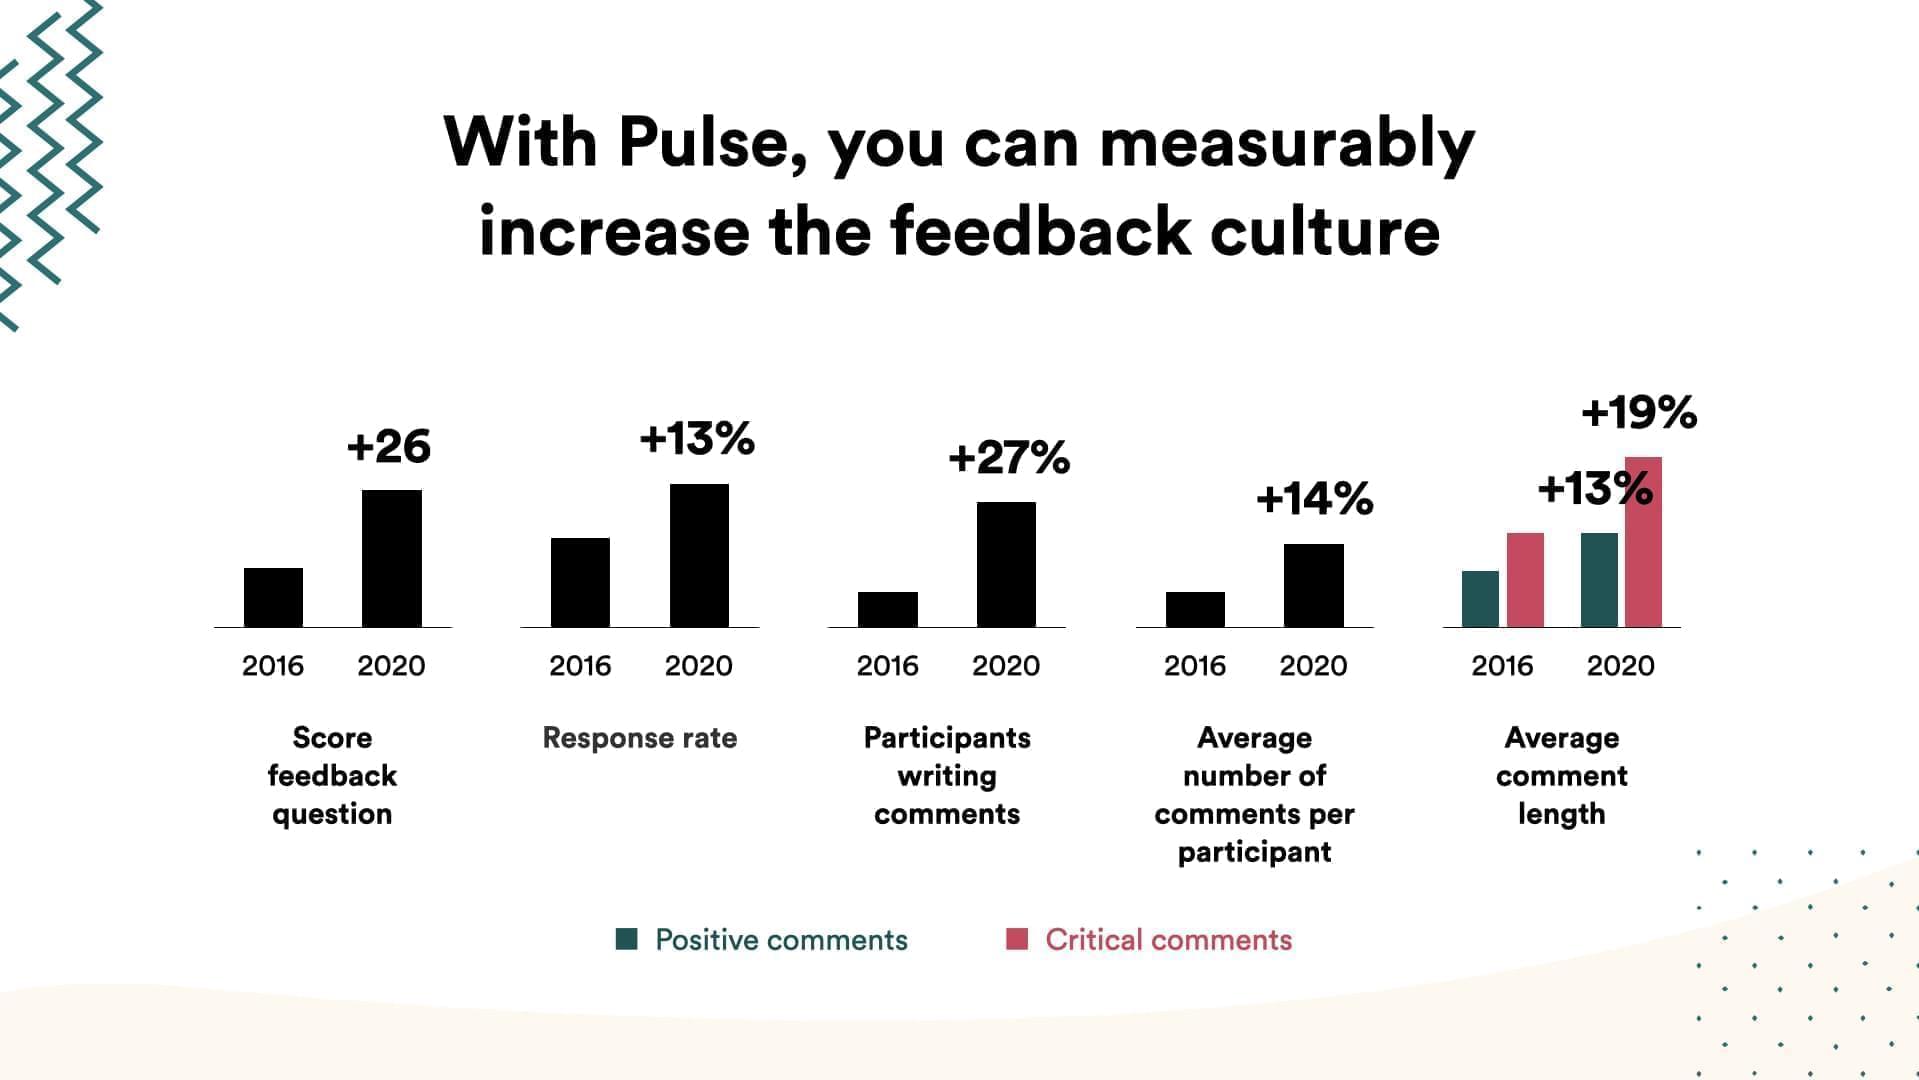 Multiple graphs with KPI's showing how positive the feedback culture improved from 2016 to 2020